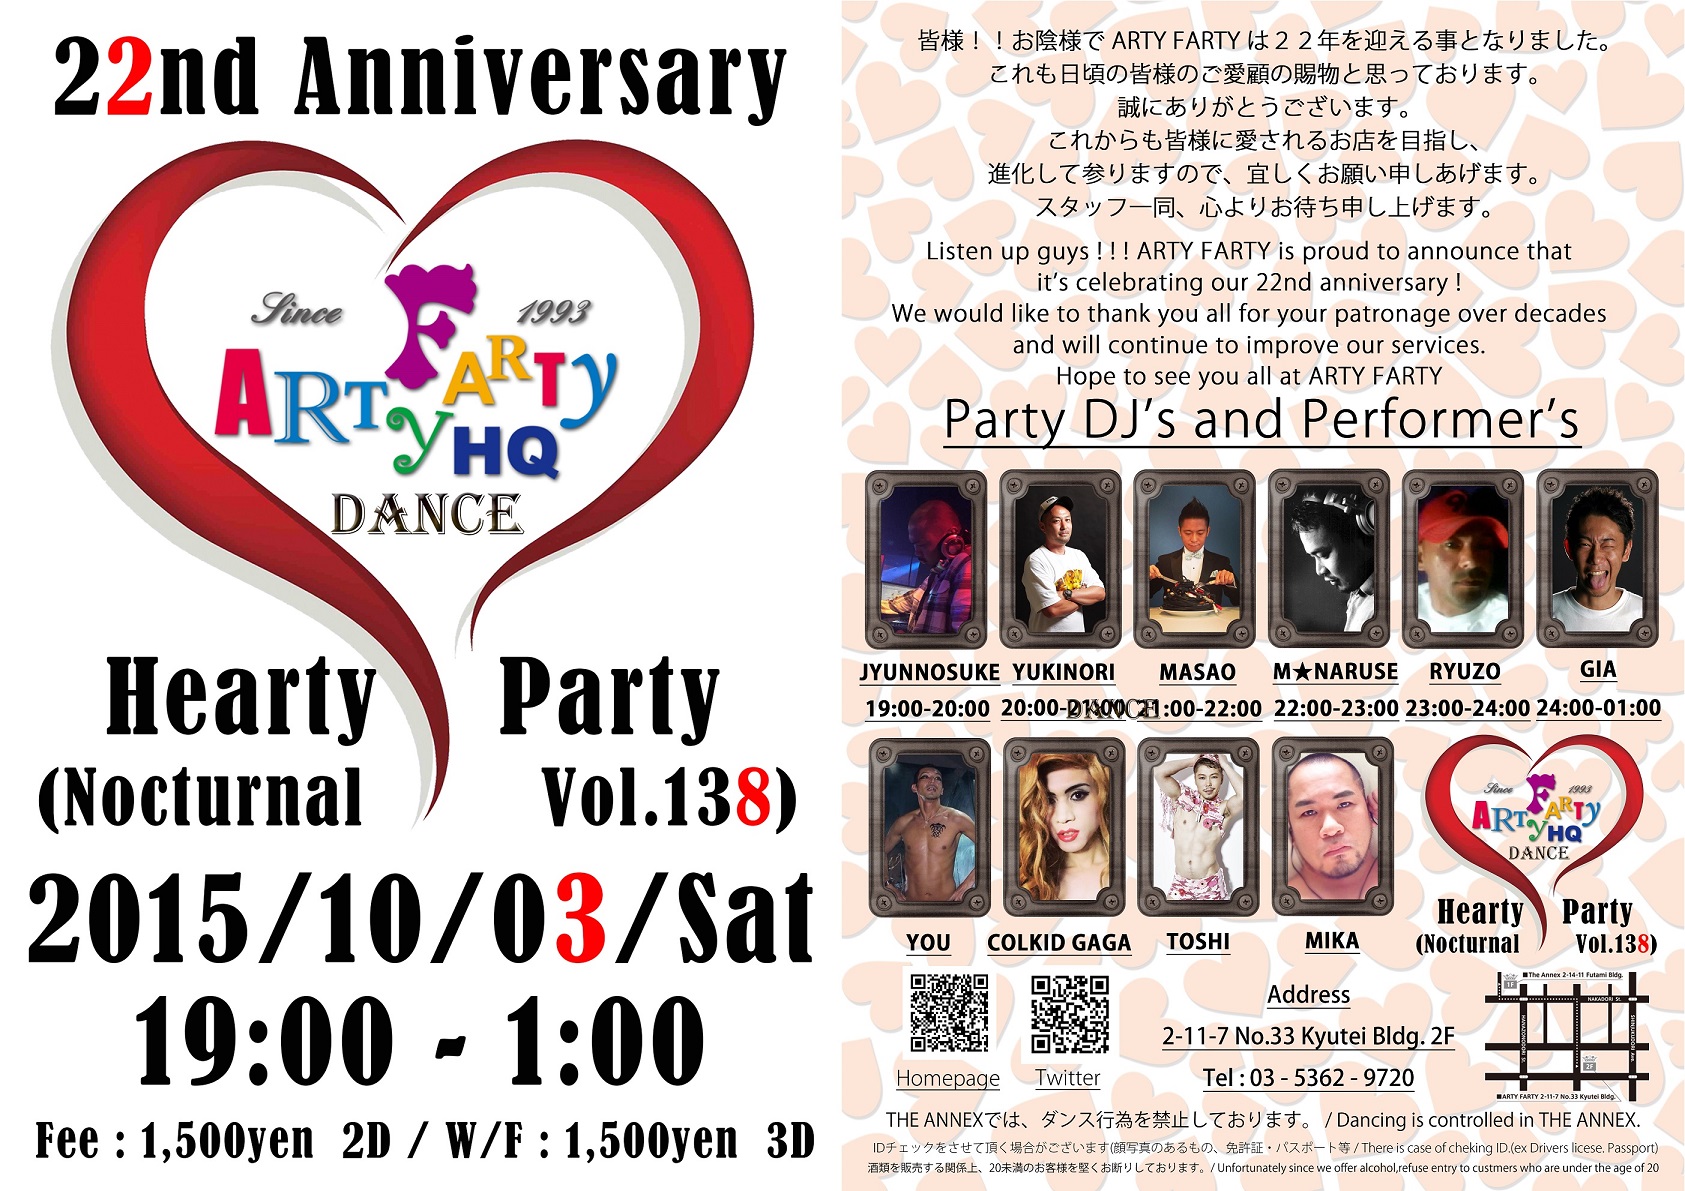 ARTY FARTY 22nd Anniversary ( Hearty Party )